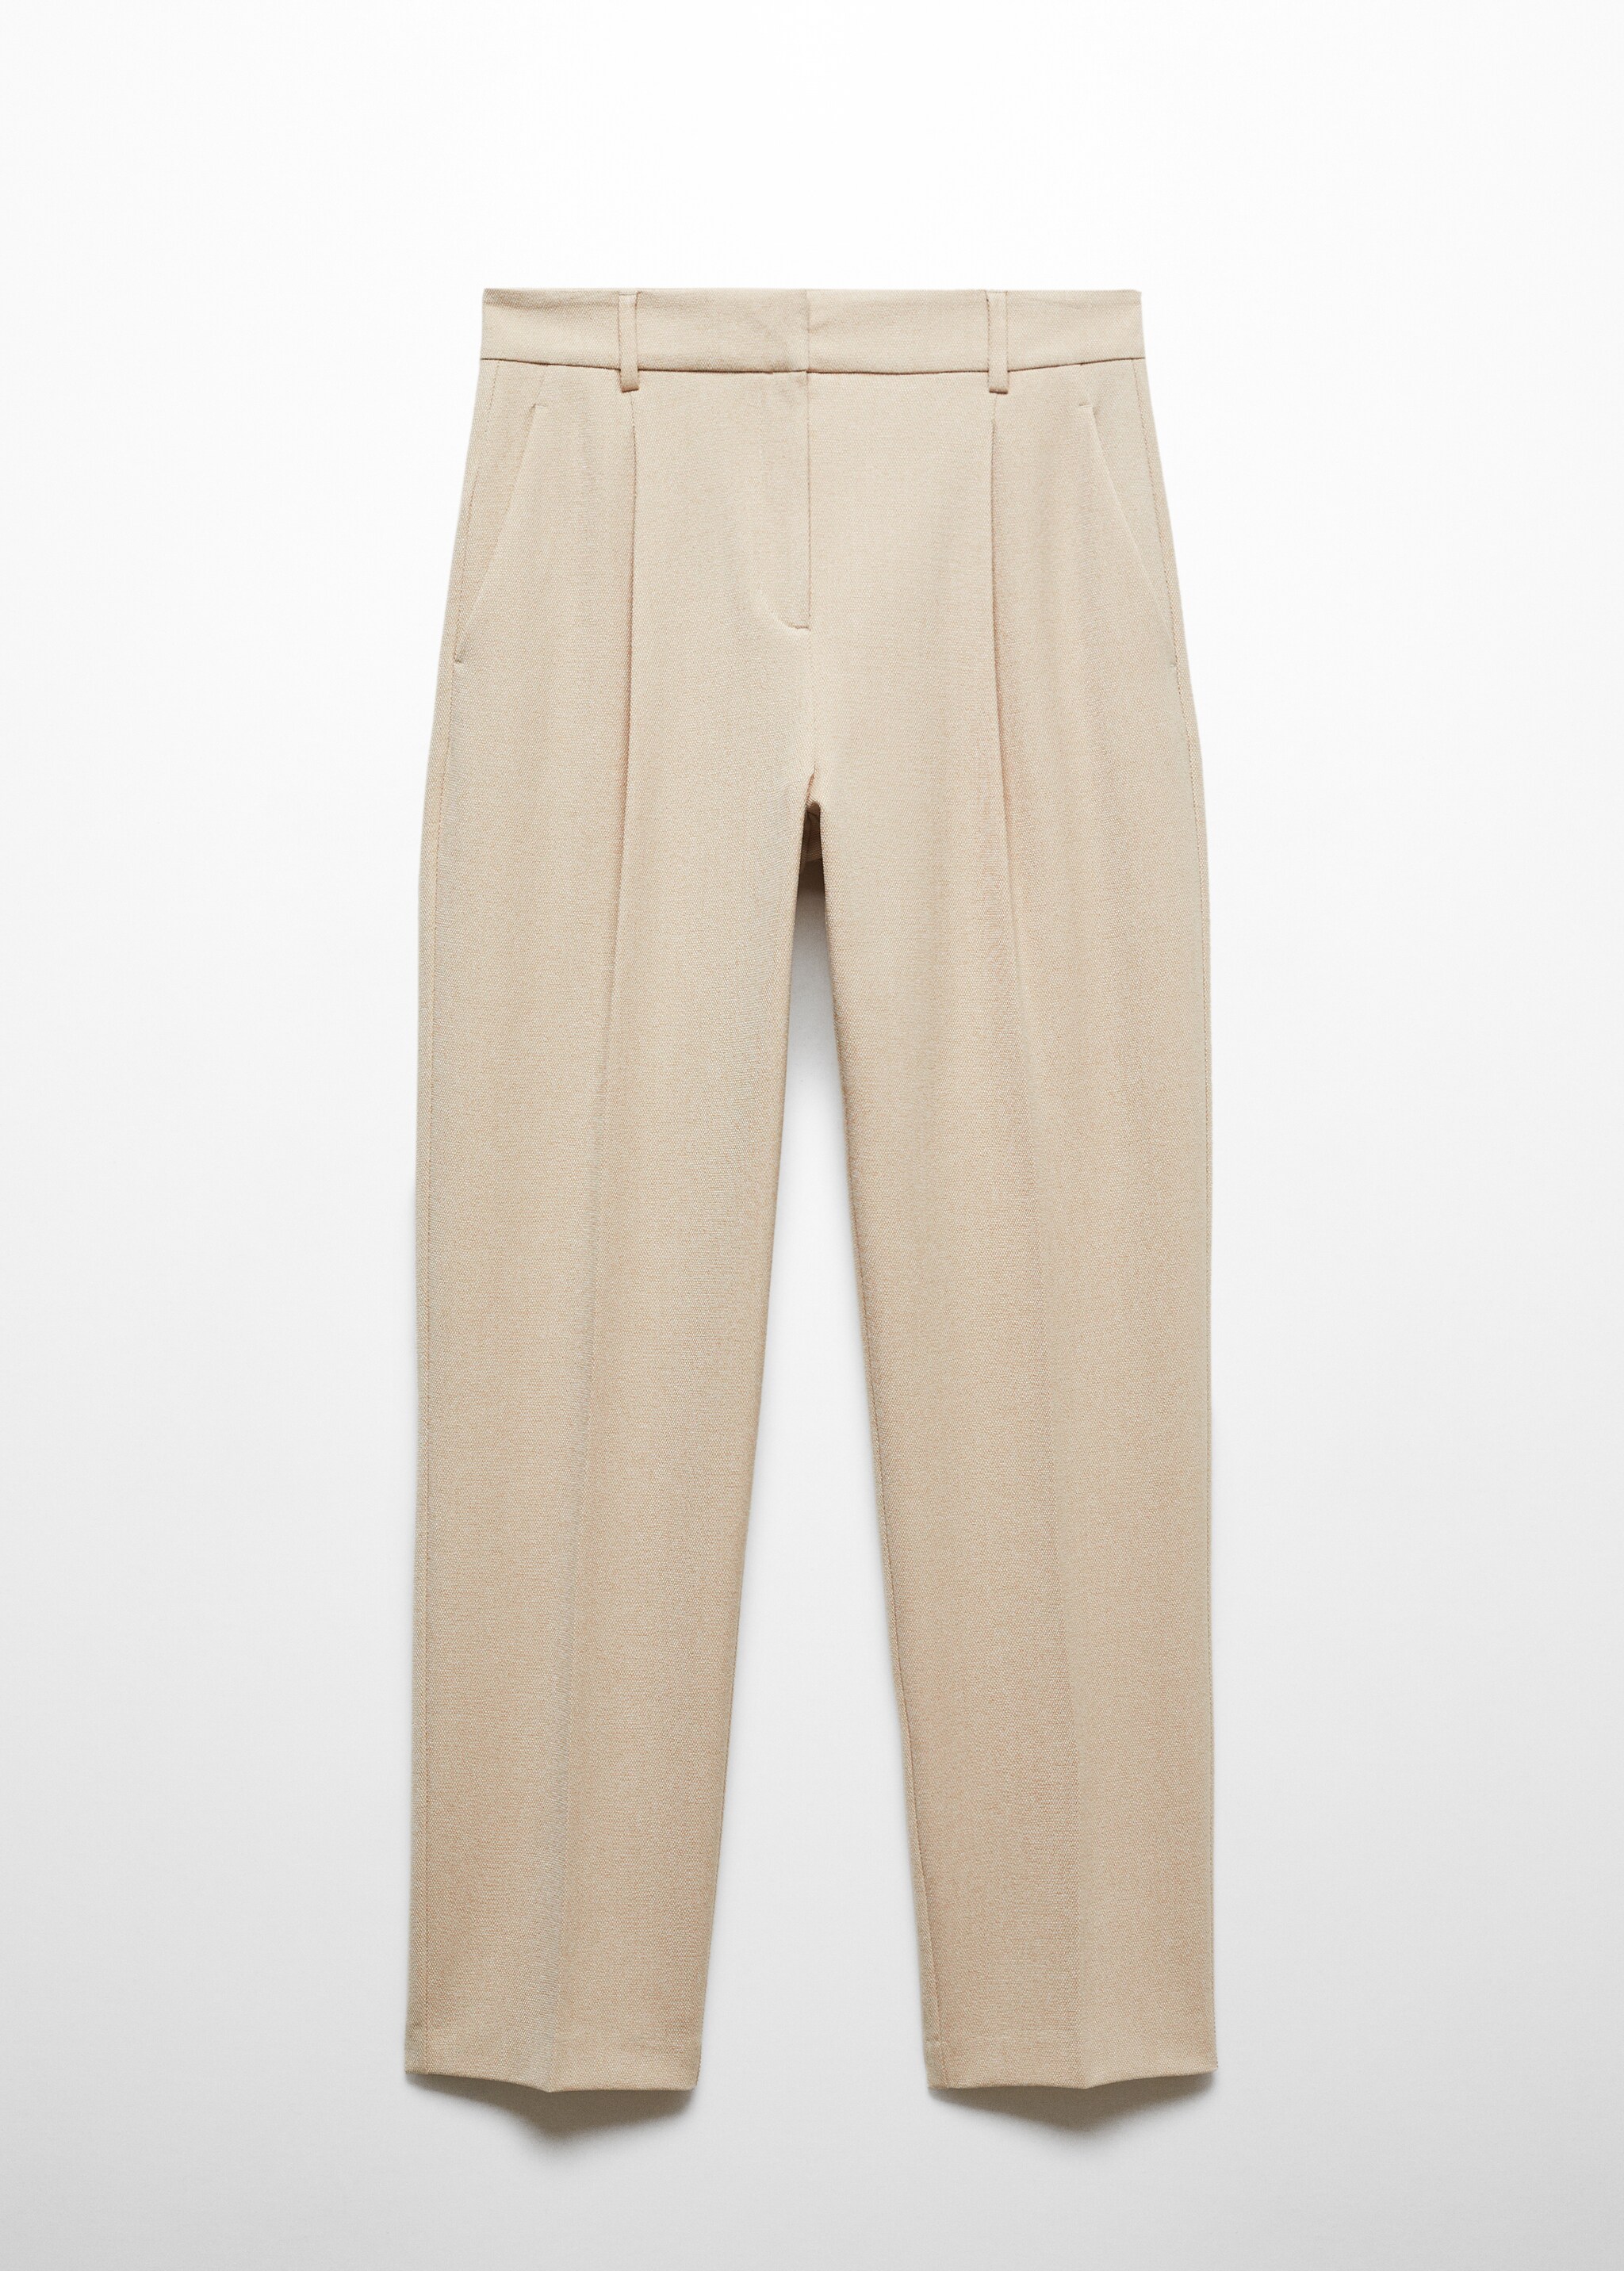 Pleat straight trousers - Article without model